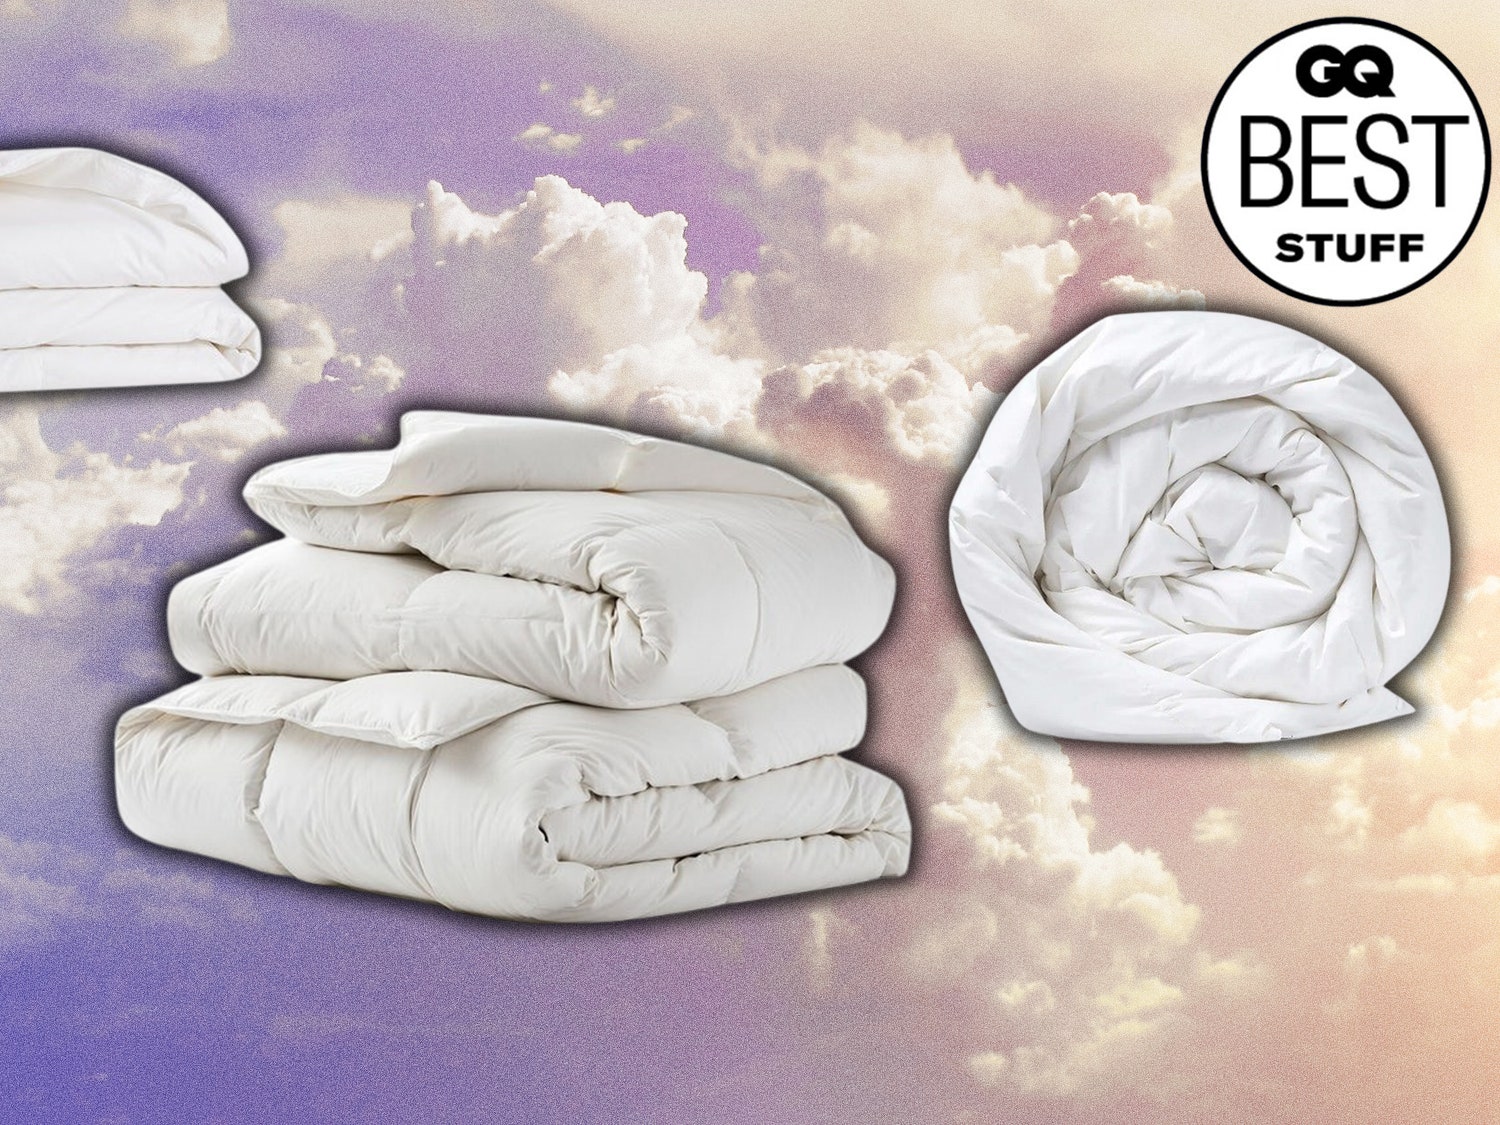 We Found the Best Comforters for Every Kind of Sleeper